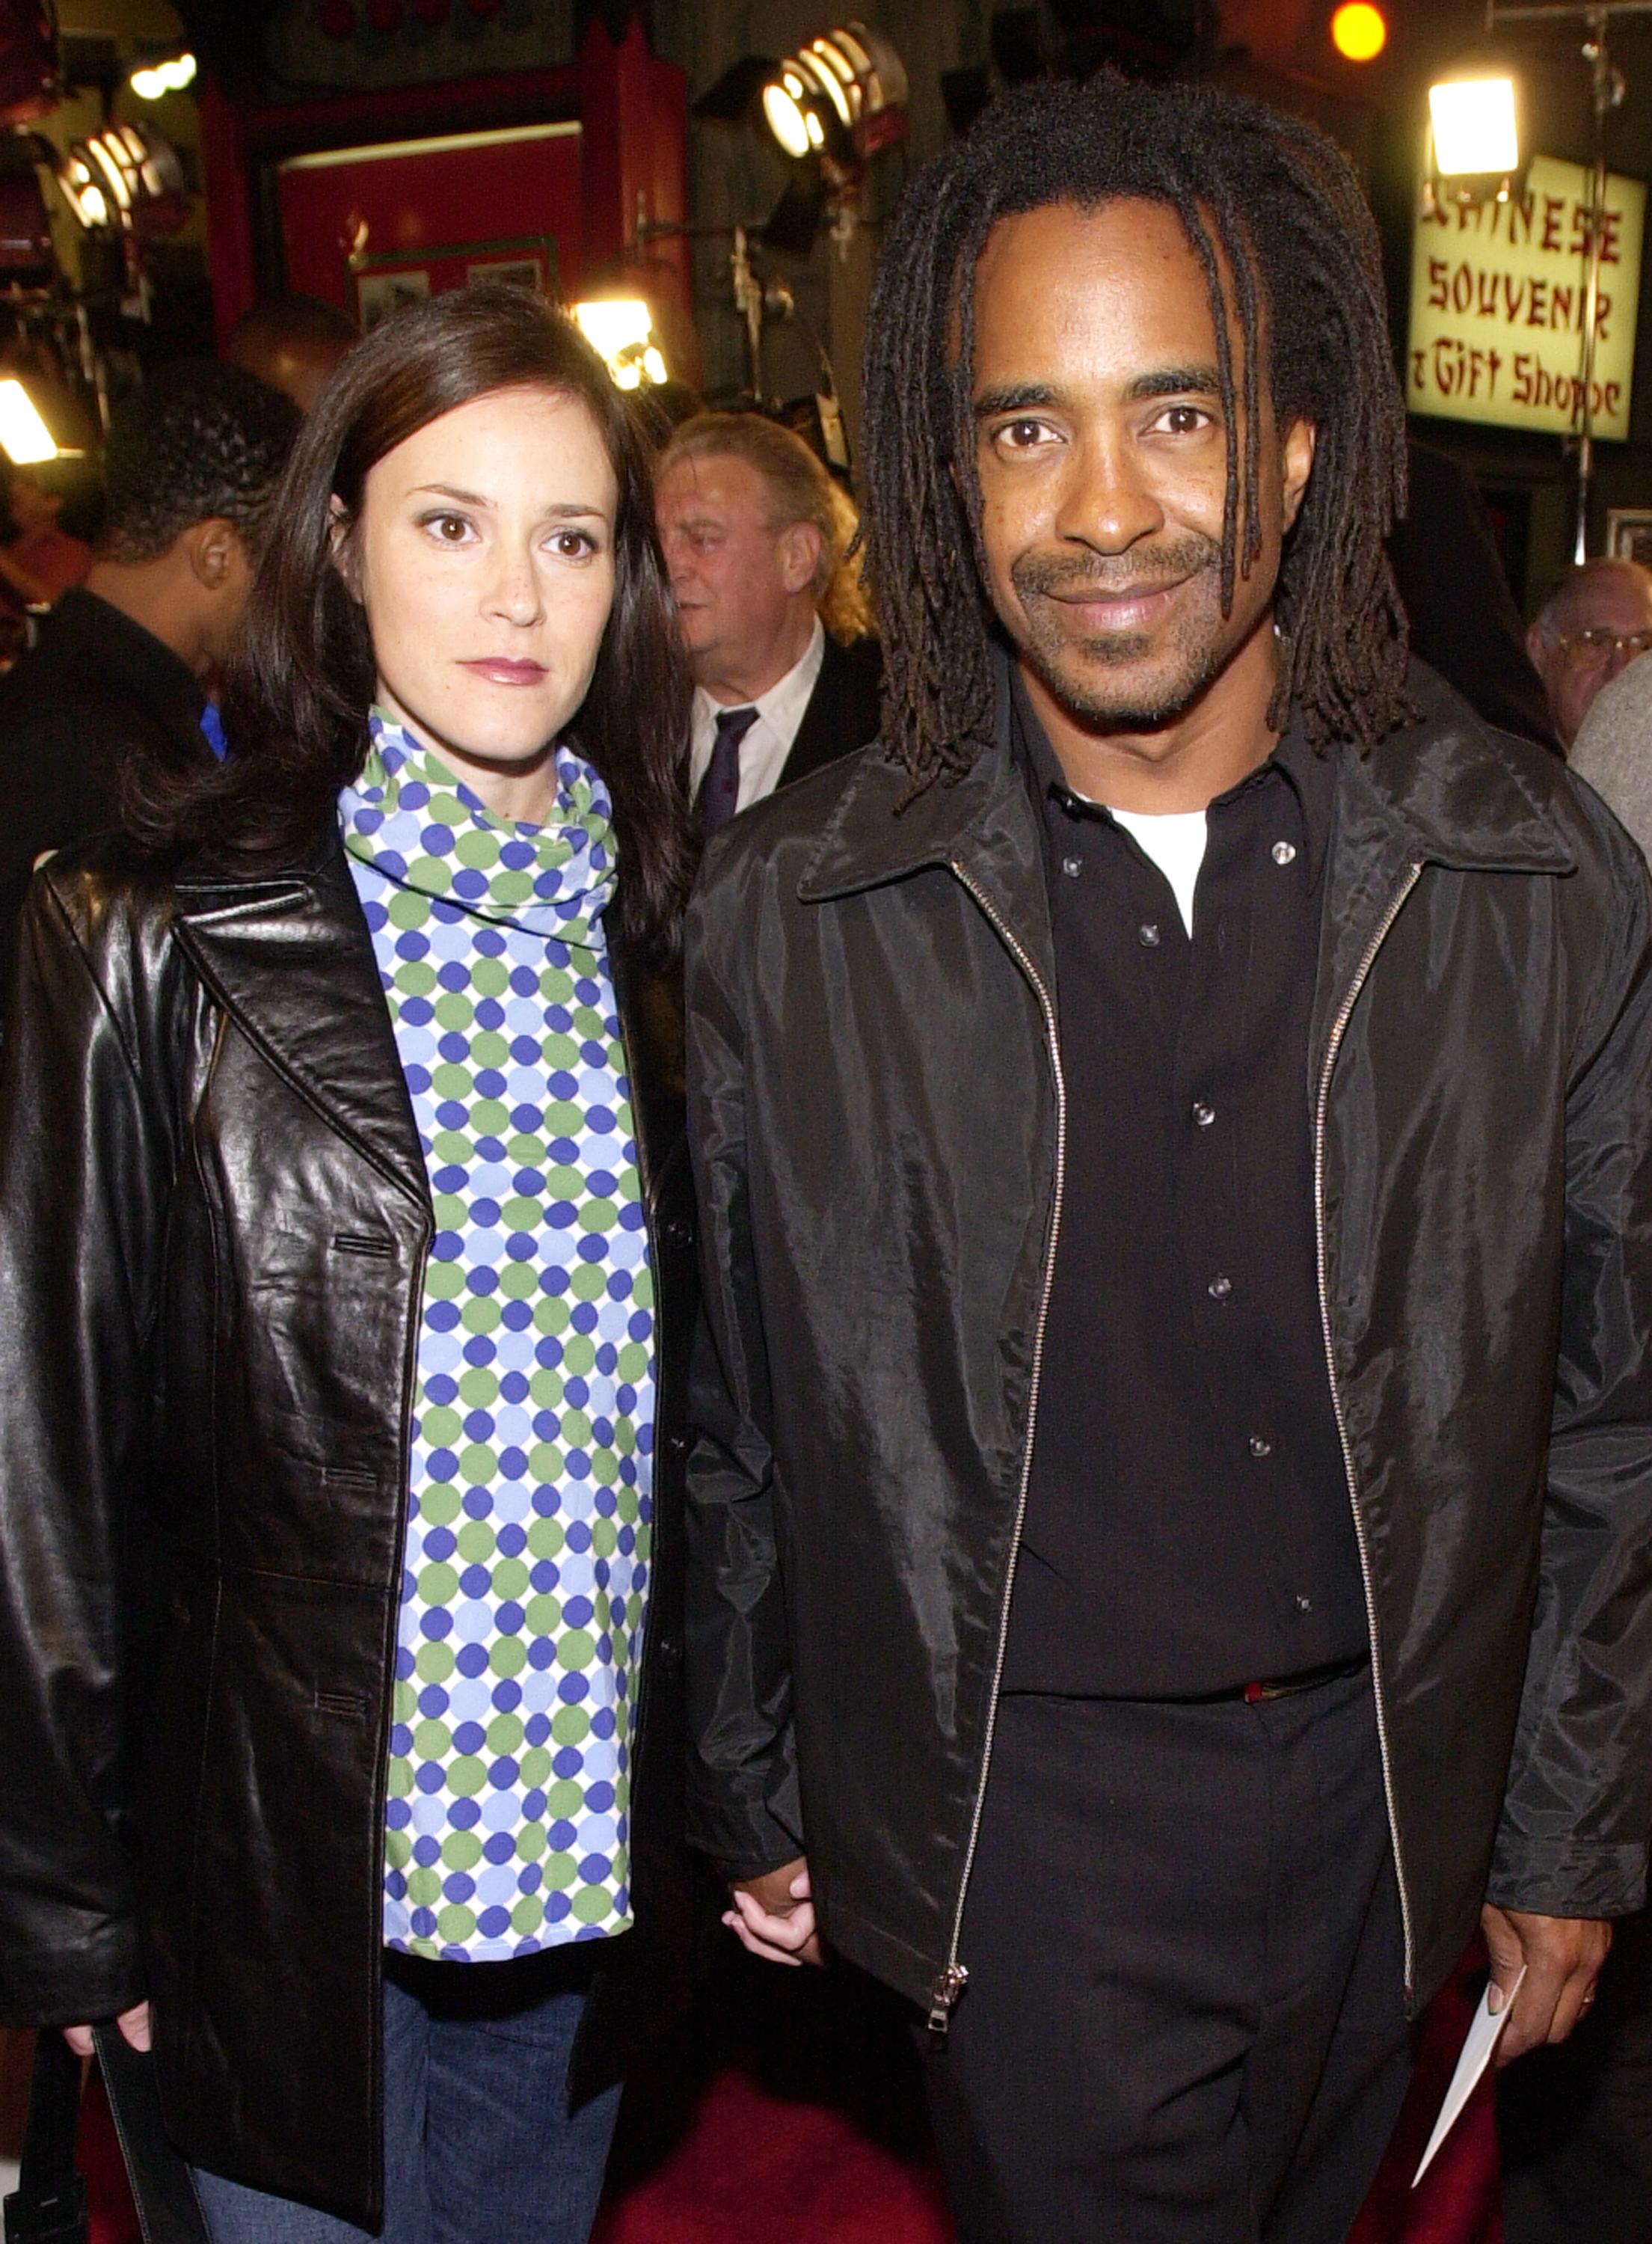 Tim Meadows and Michelle Taylor at the premiere of New Line's "Little Nicky" at Mann's Chinese Theatre on November 2, 2000, in Hollywood, California. | Source: Getty Images